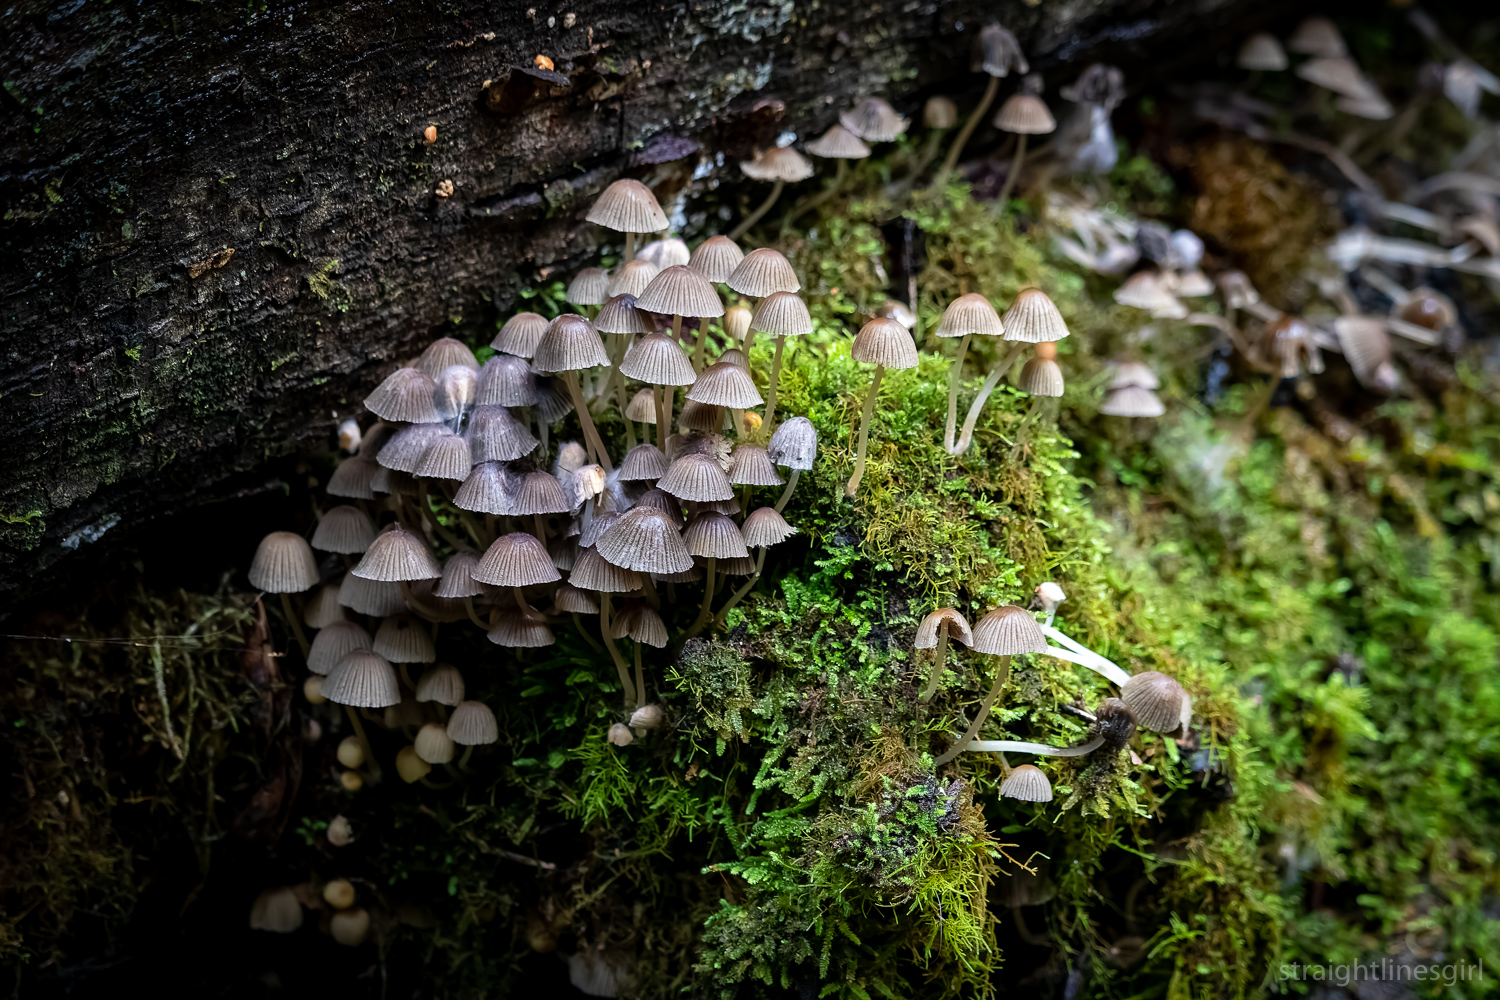 A cluster of grey-white funghi on a horizontal tree trunk surrounded by moss